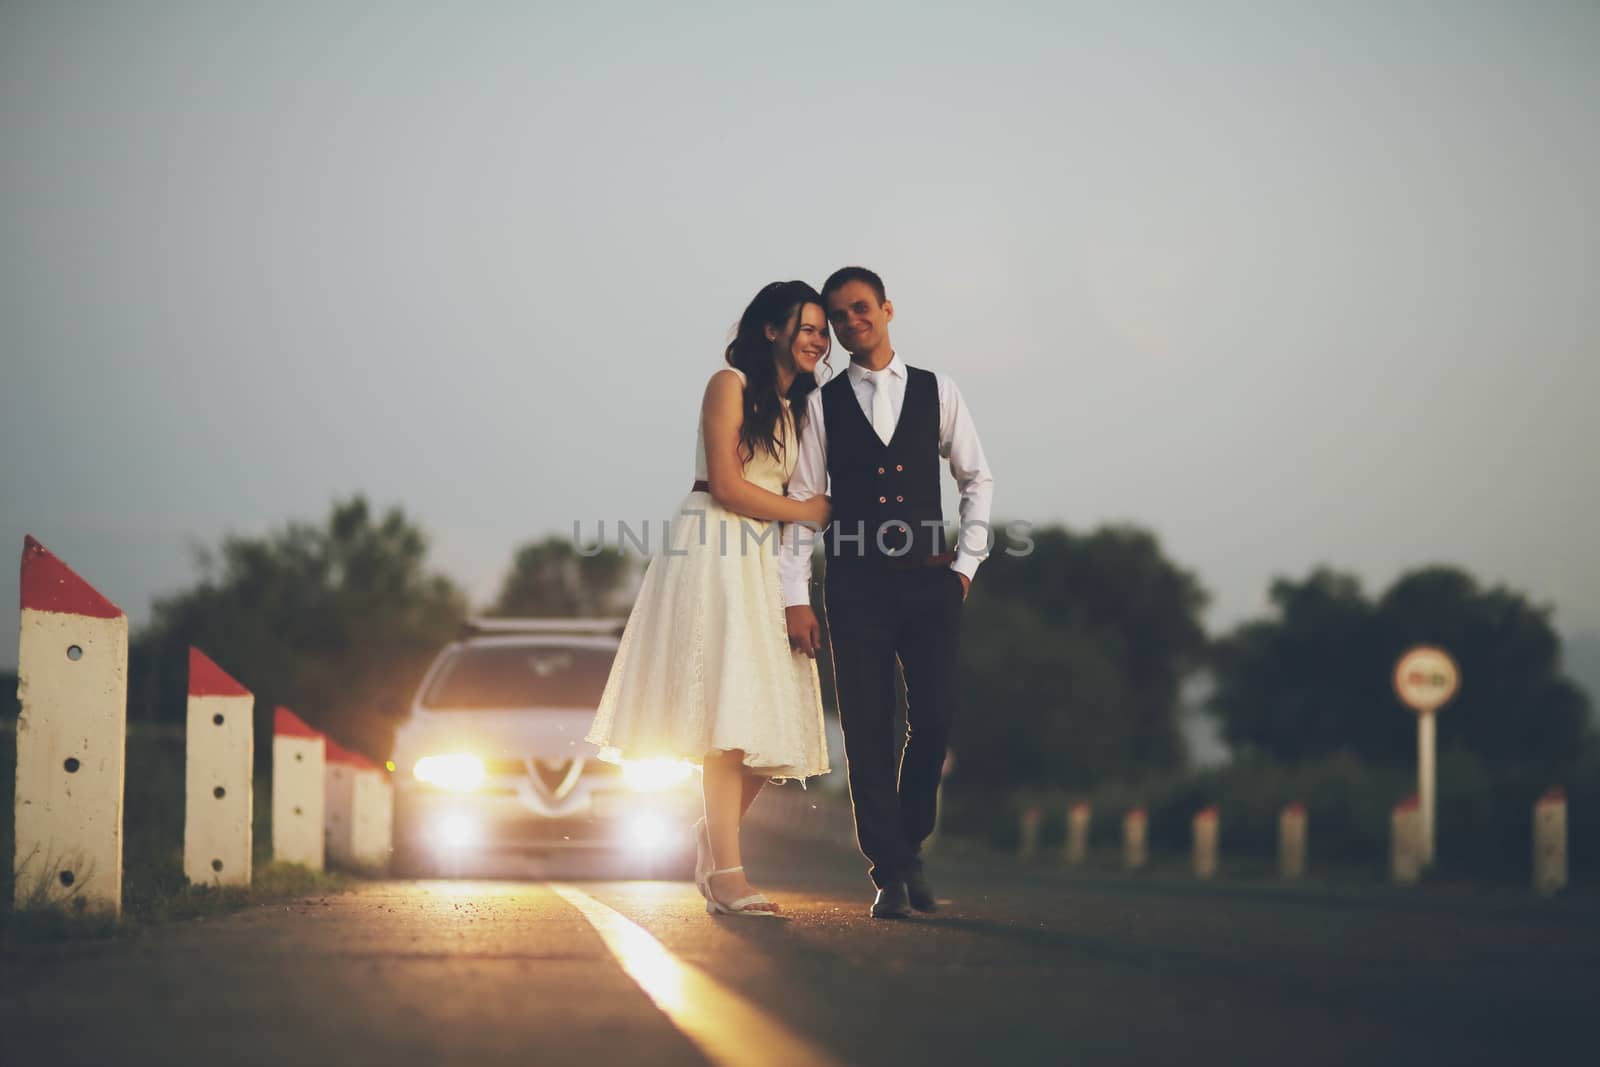 Happy bride and groom in the light of car headlights. Wedding. Happy love concept. High quality photo